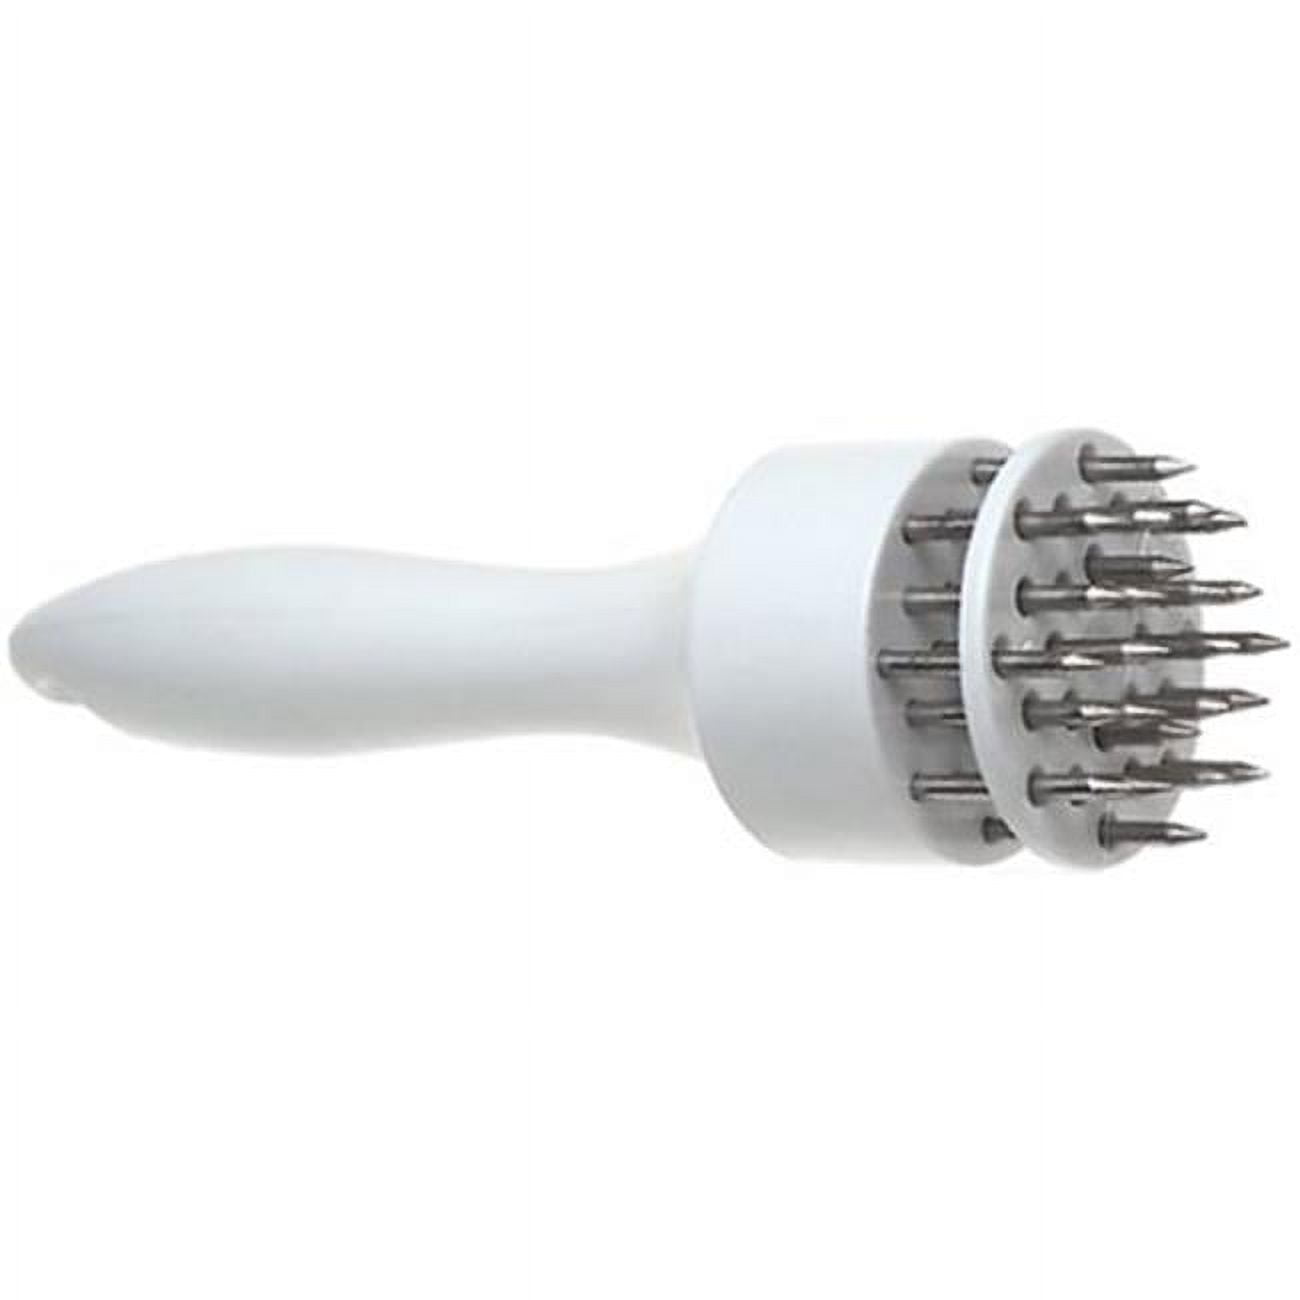 Stainless Steel Meat Tenderizer, Meat Mallet Needle Nails, Silver Tone -  Silver Tone - On Sale - Bed Bath & Beyond - 37683468